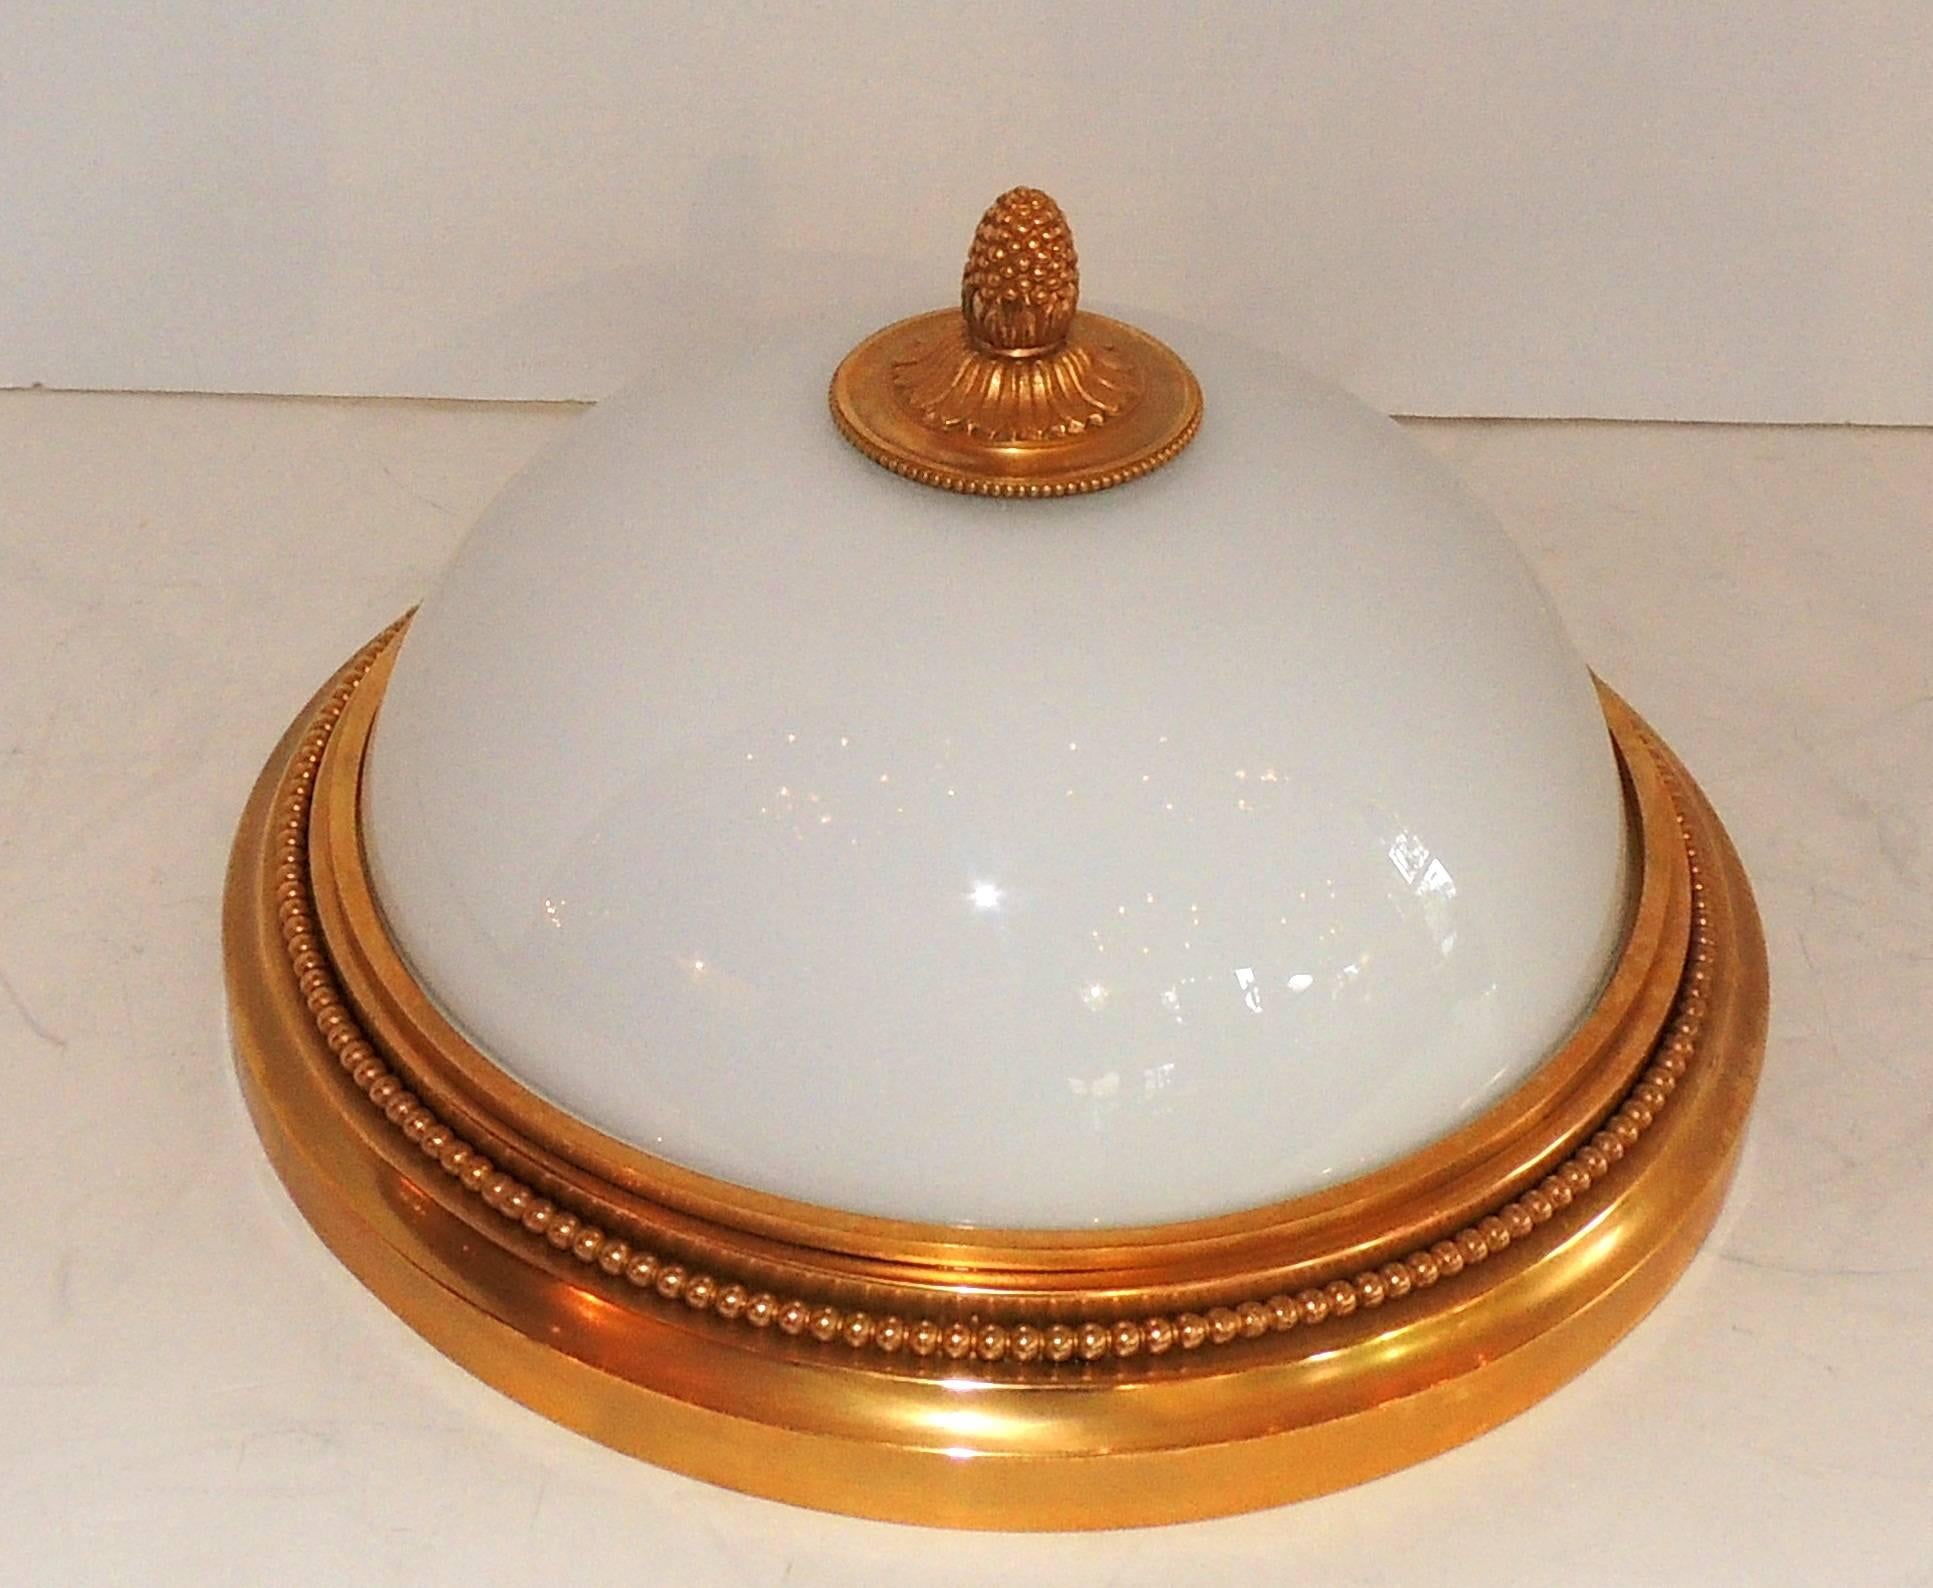 A wonderful Sherle Wagner doré bronze and white dome glass flushmount light fixture. This beautiful fixture is set with two candelabra bulbs taking a maximum of 60 watts per socket. In excellent condition, and come ready to install and